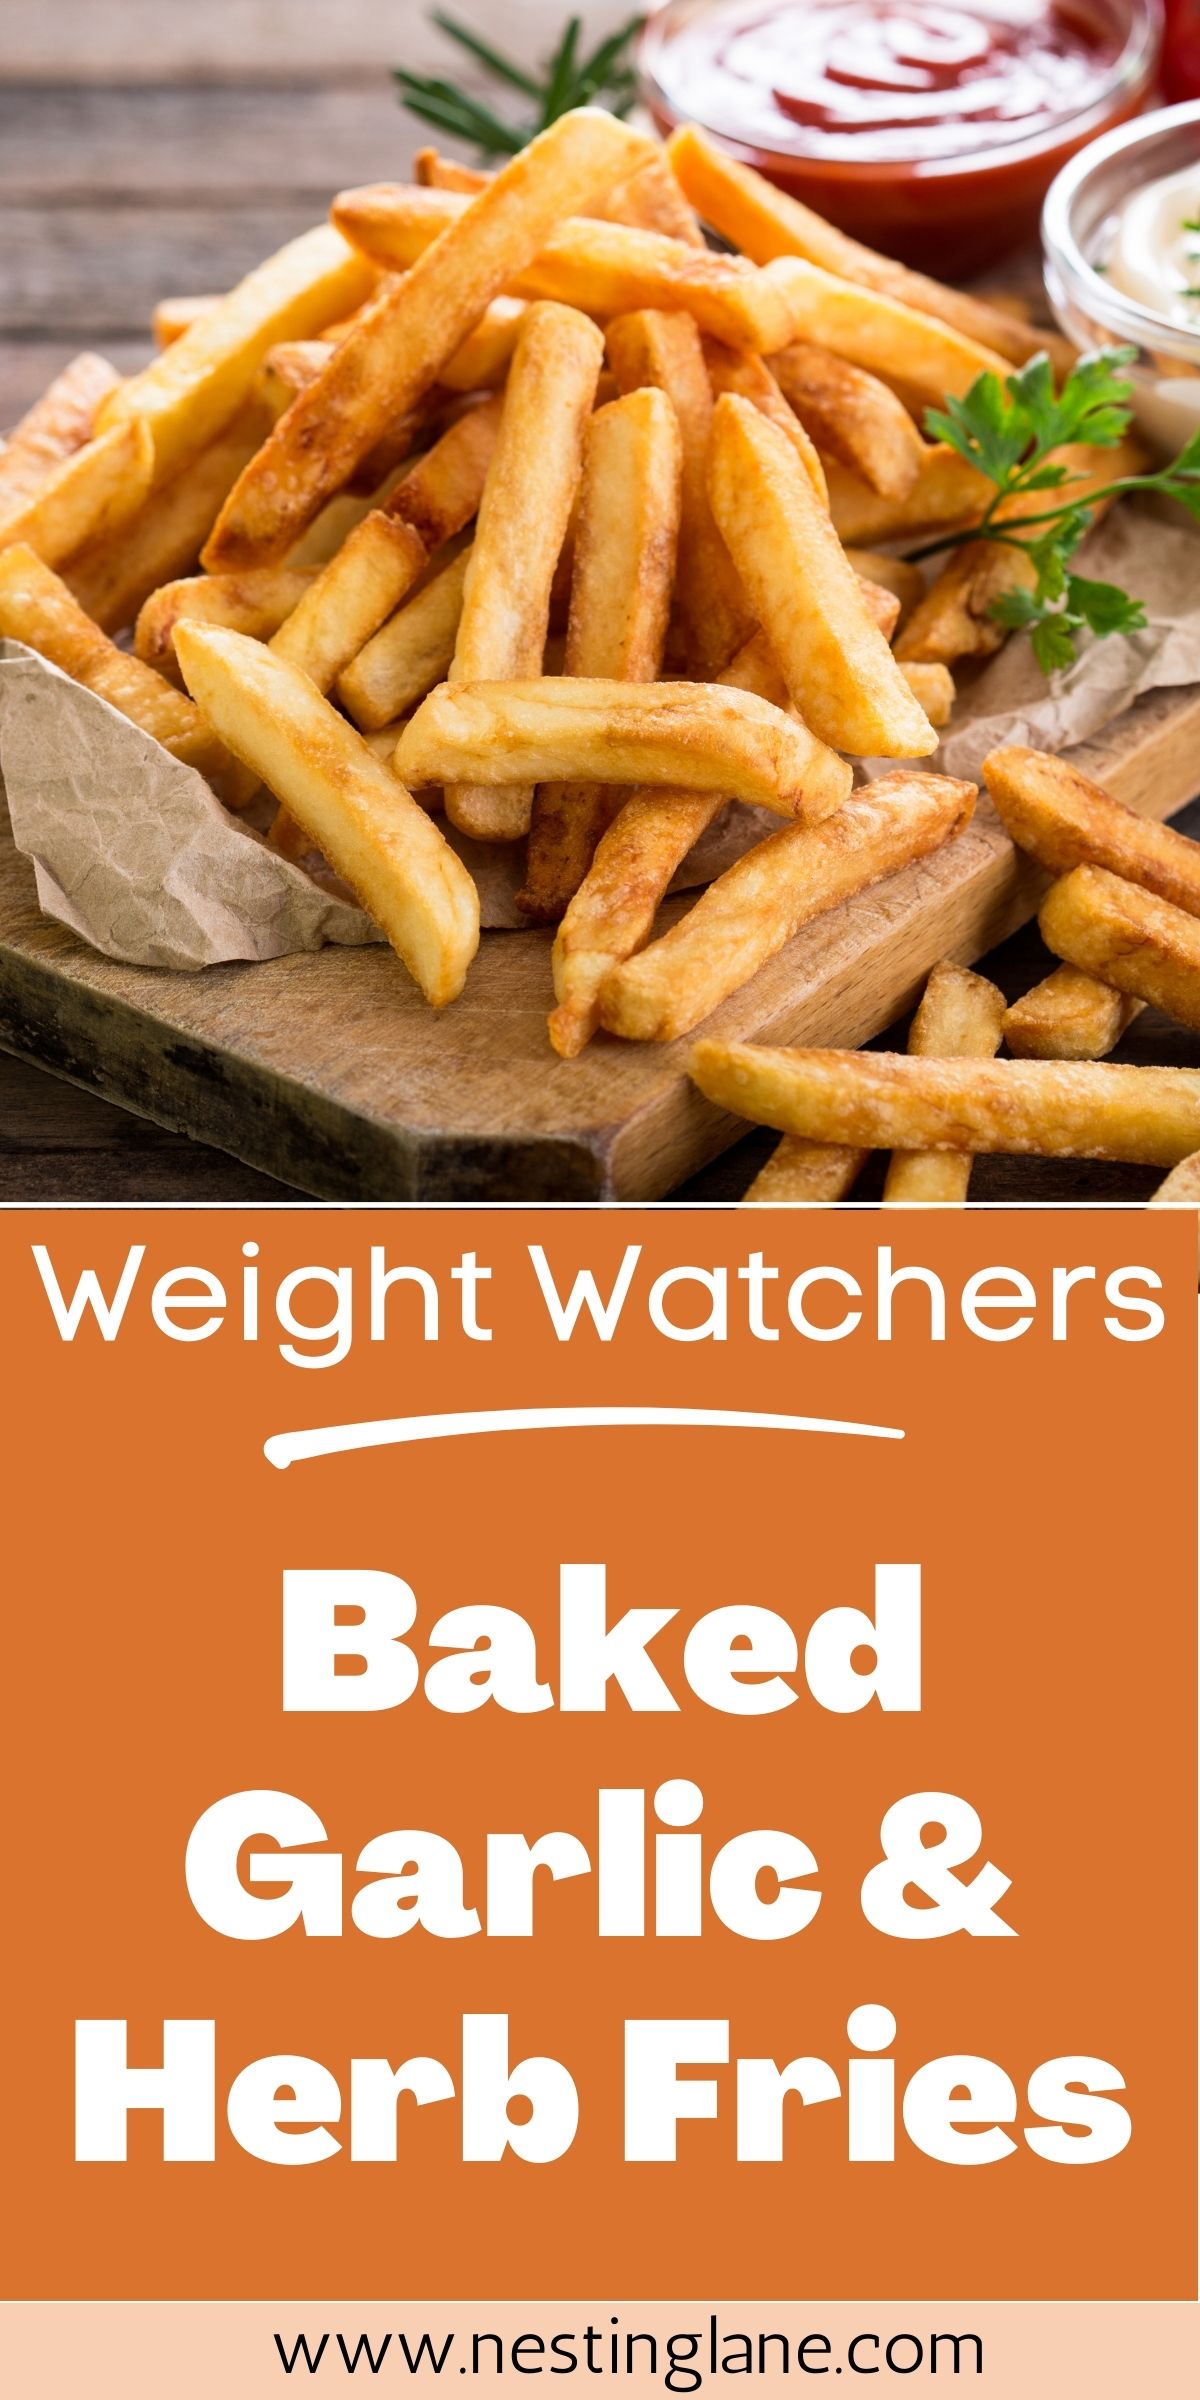 Graphic for Pinterest of Weight Watchers Baked Garlic & Herb Fries Recipe.